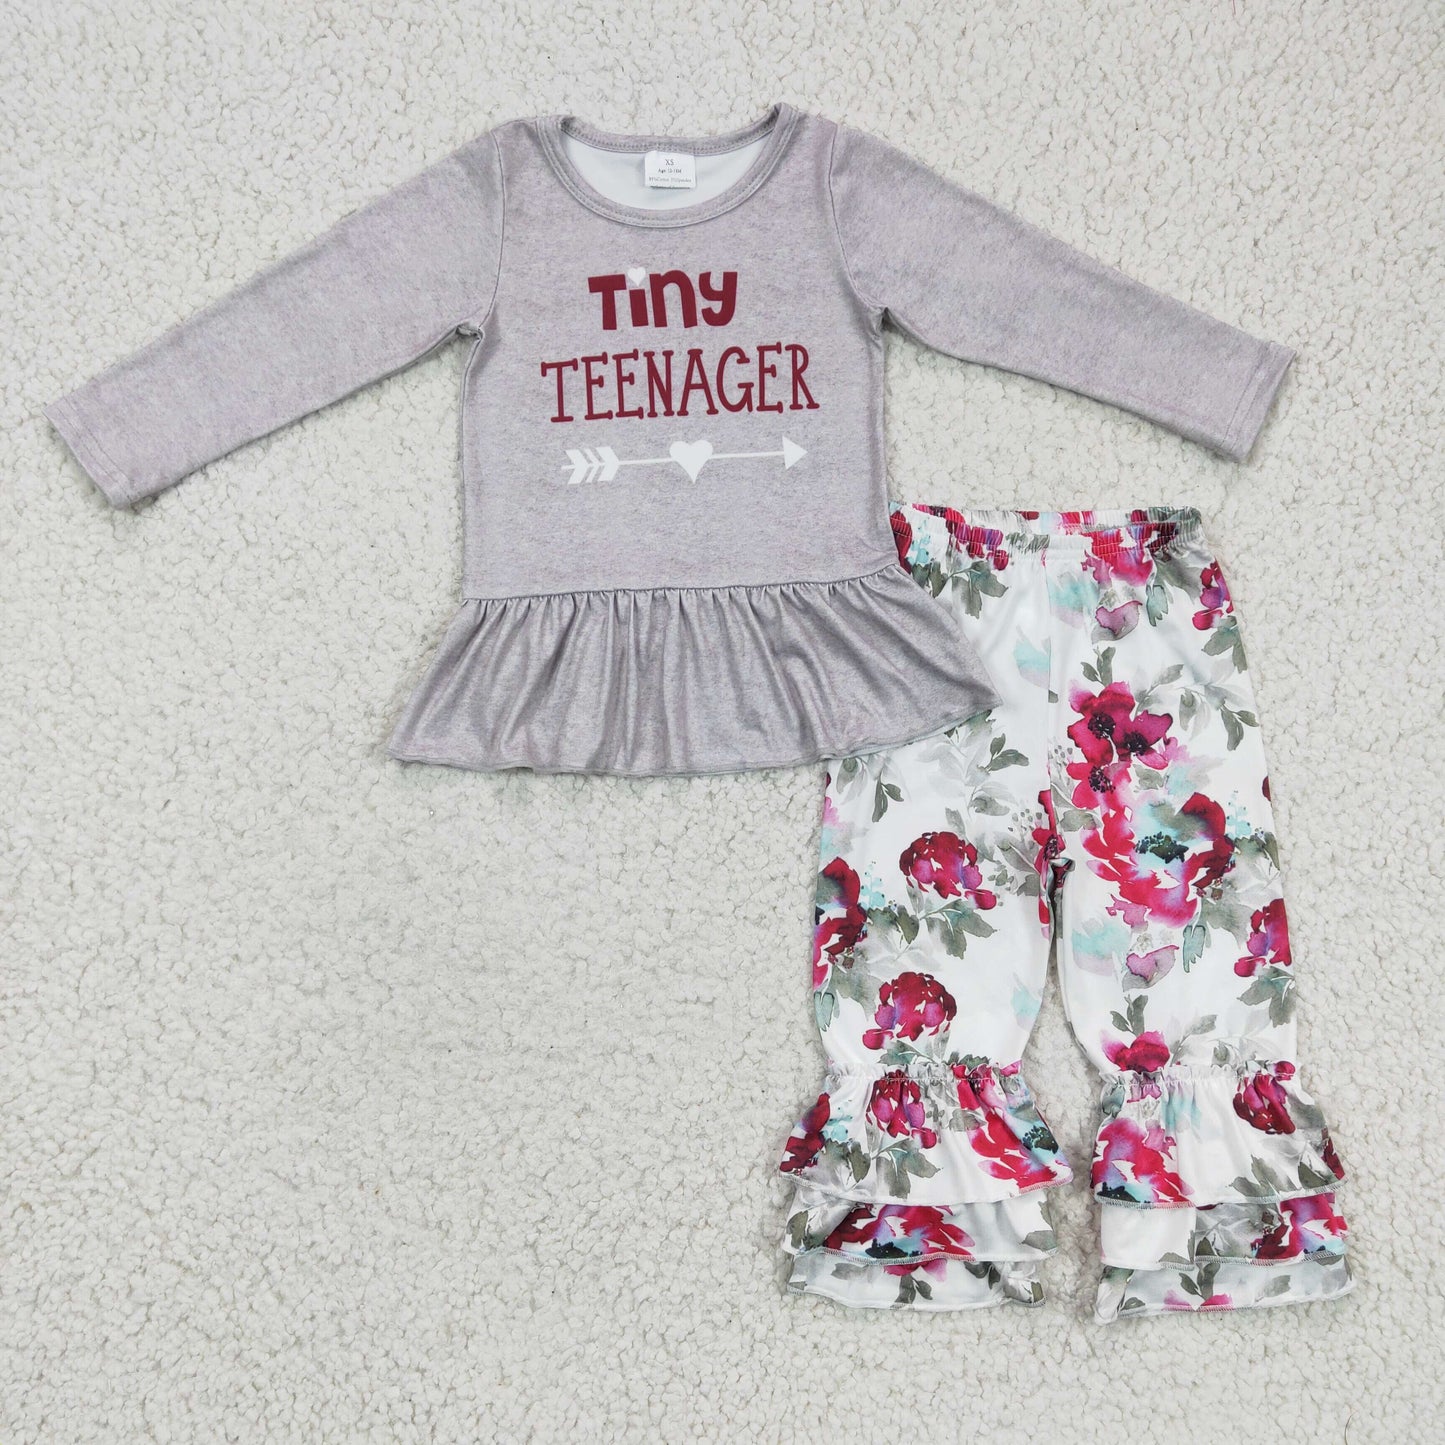 Tiny teenager outfit